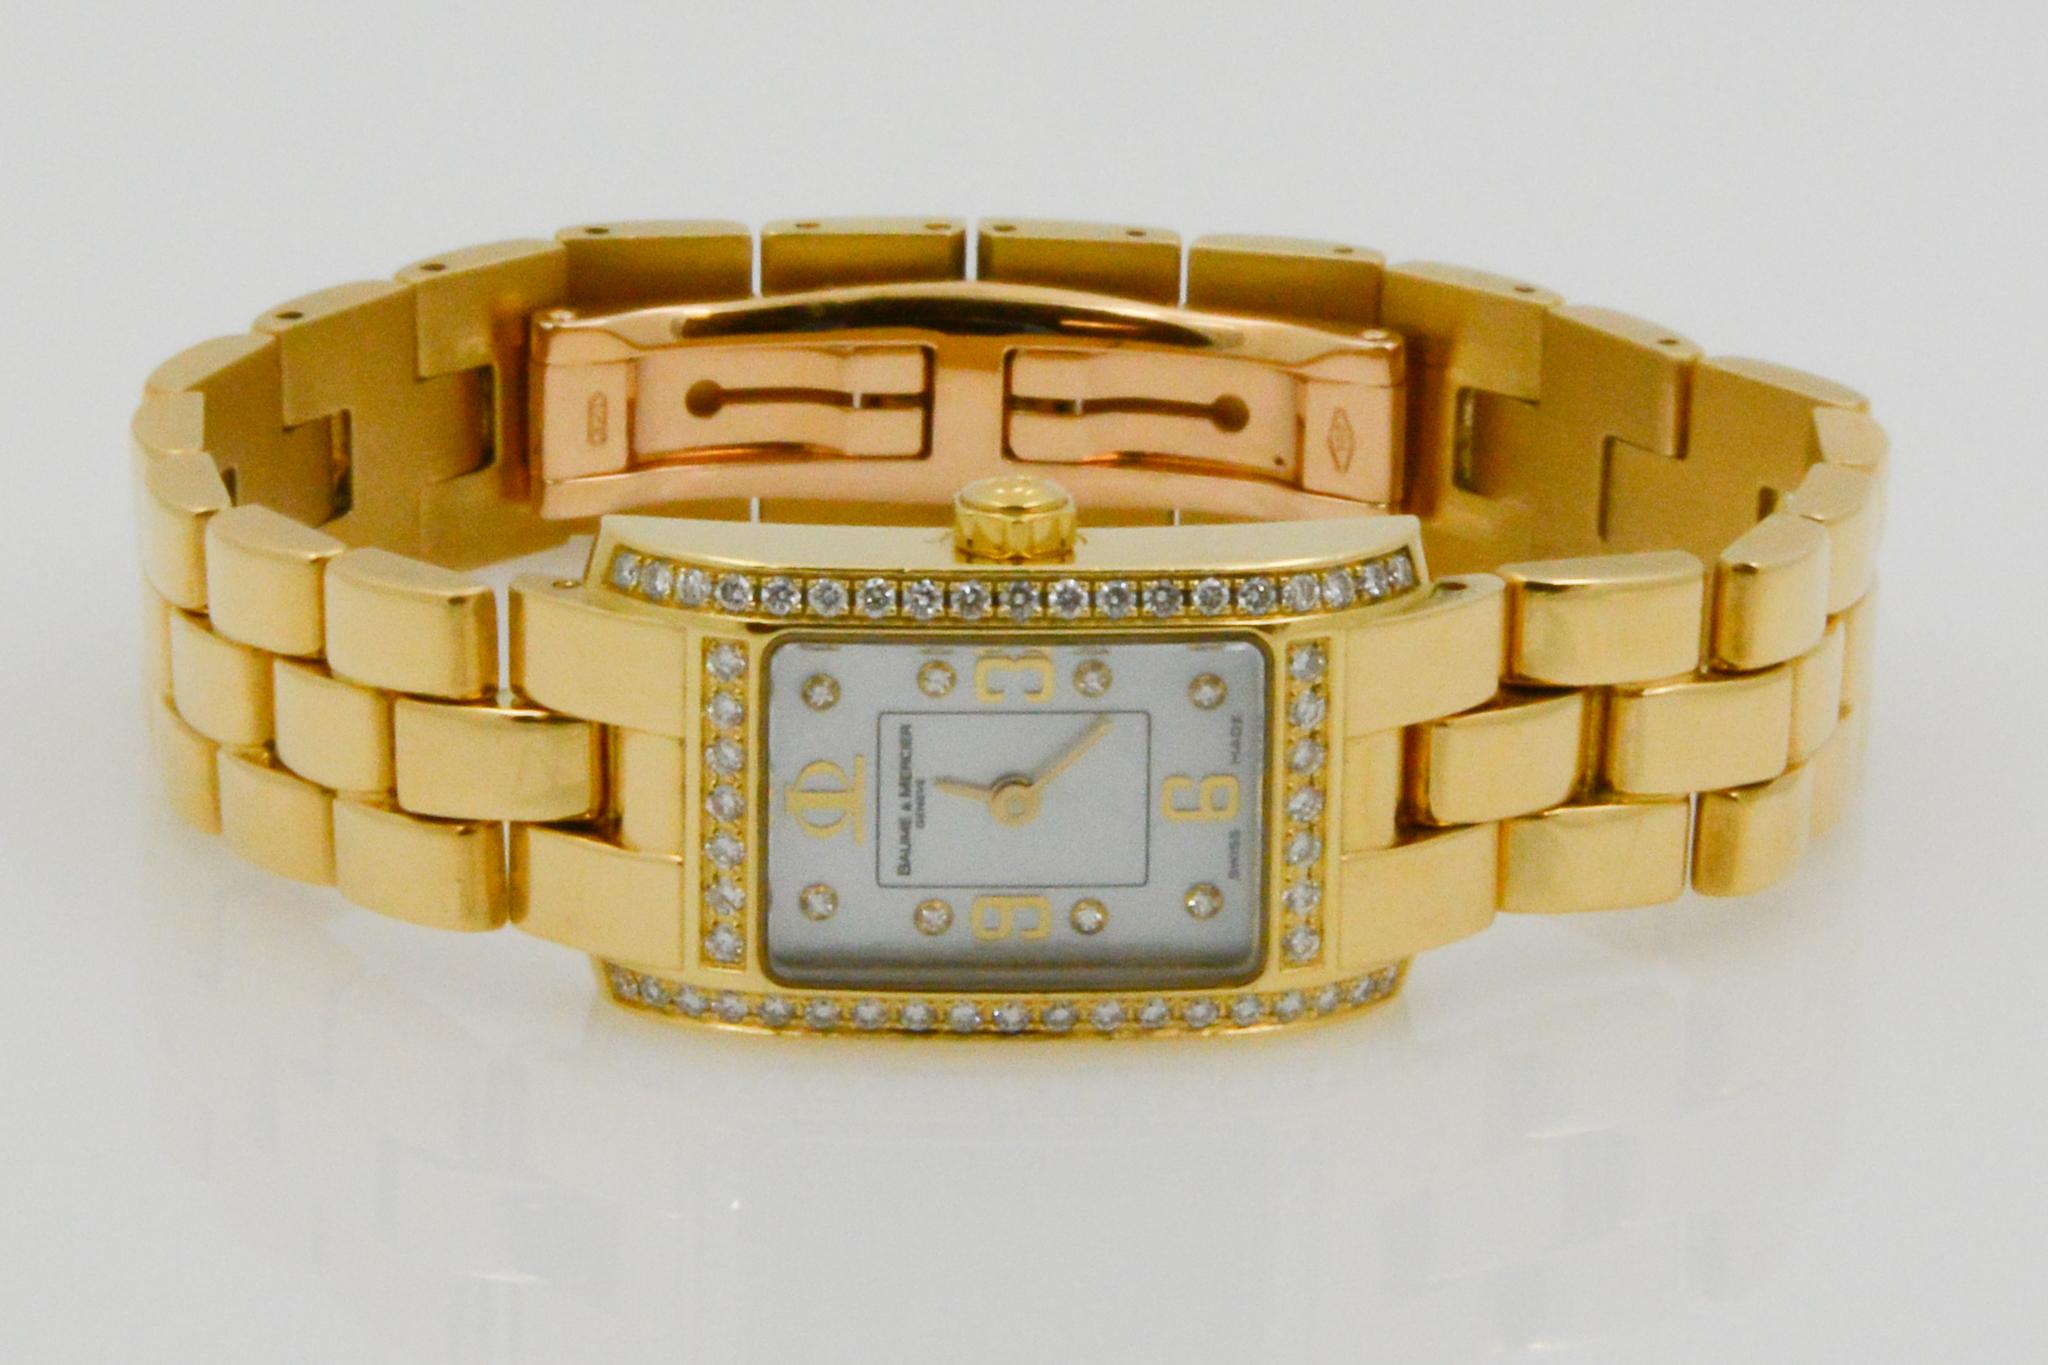 Model: Hampton Milleis #65437
Movement: Quartz
Case Material: 18k Yellow Gold
Dial: White Mother-of-Pearl
Closure: Folding Clasp
Circa 2001 no box, no papers